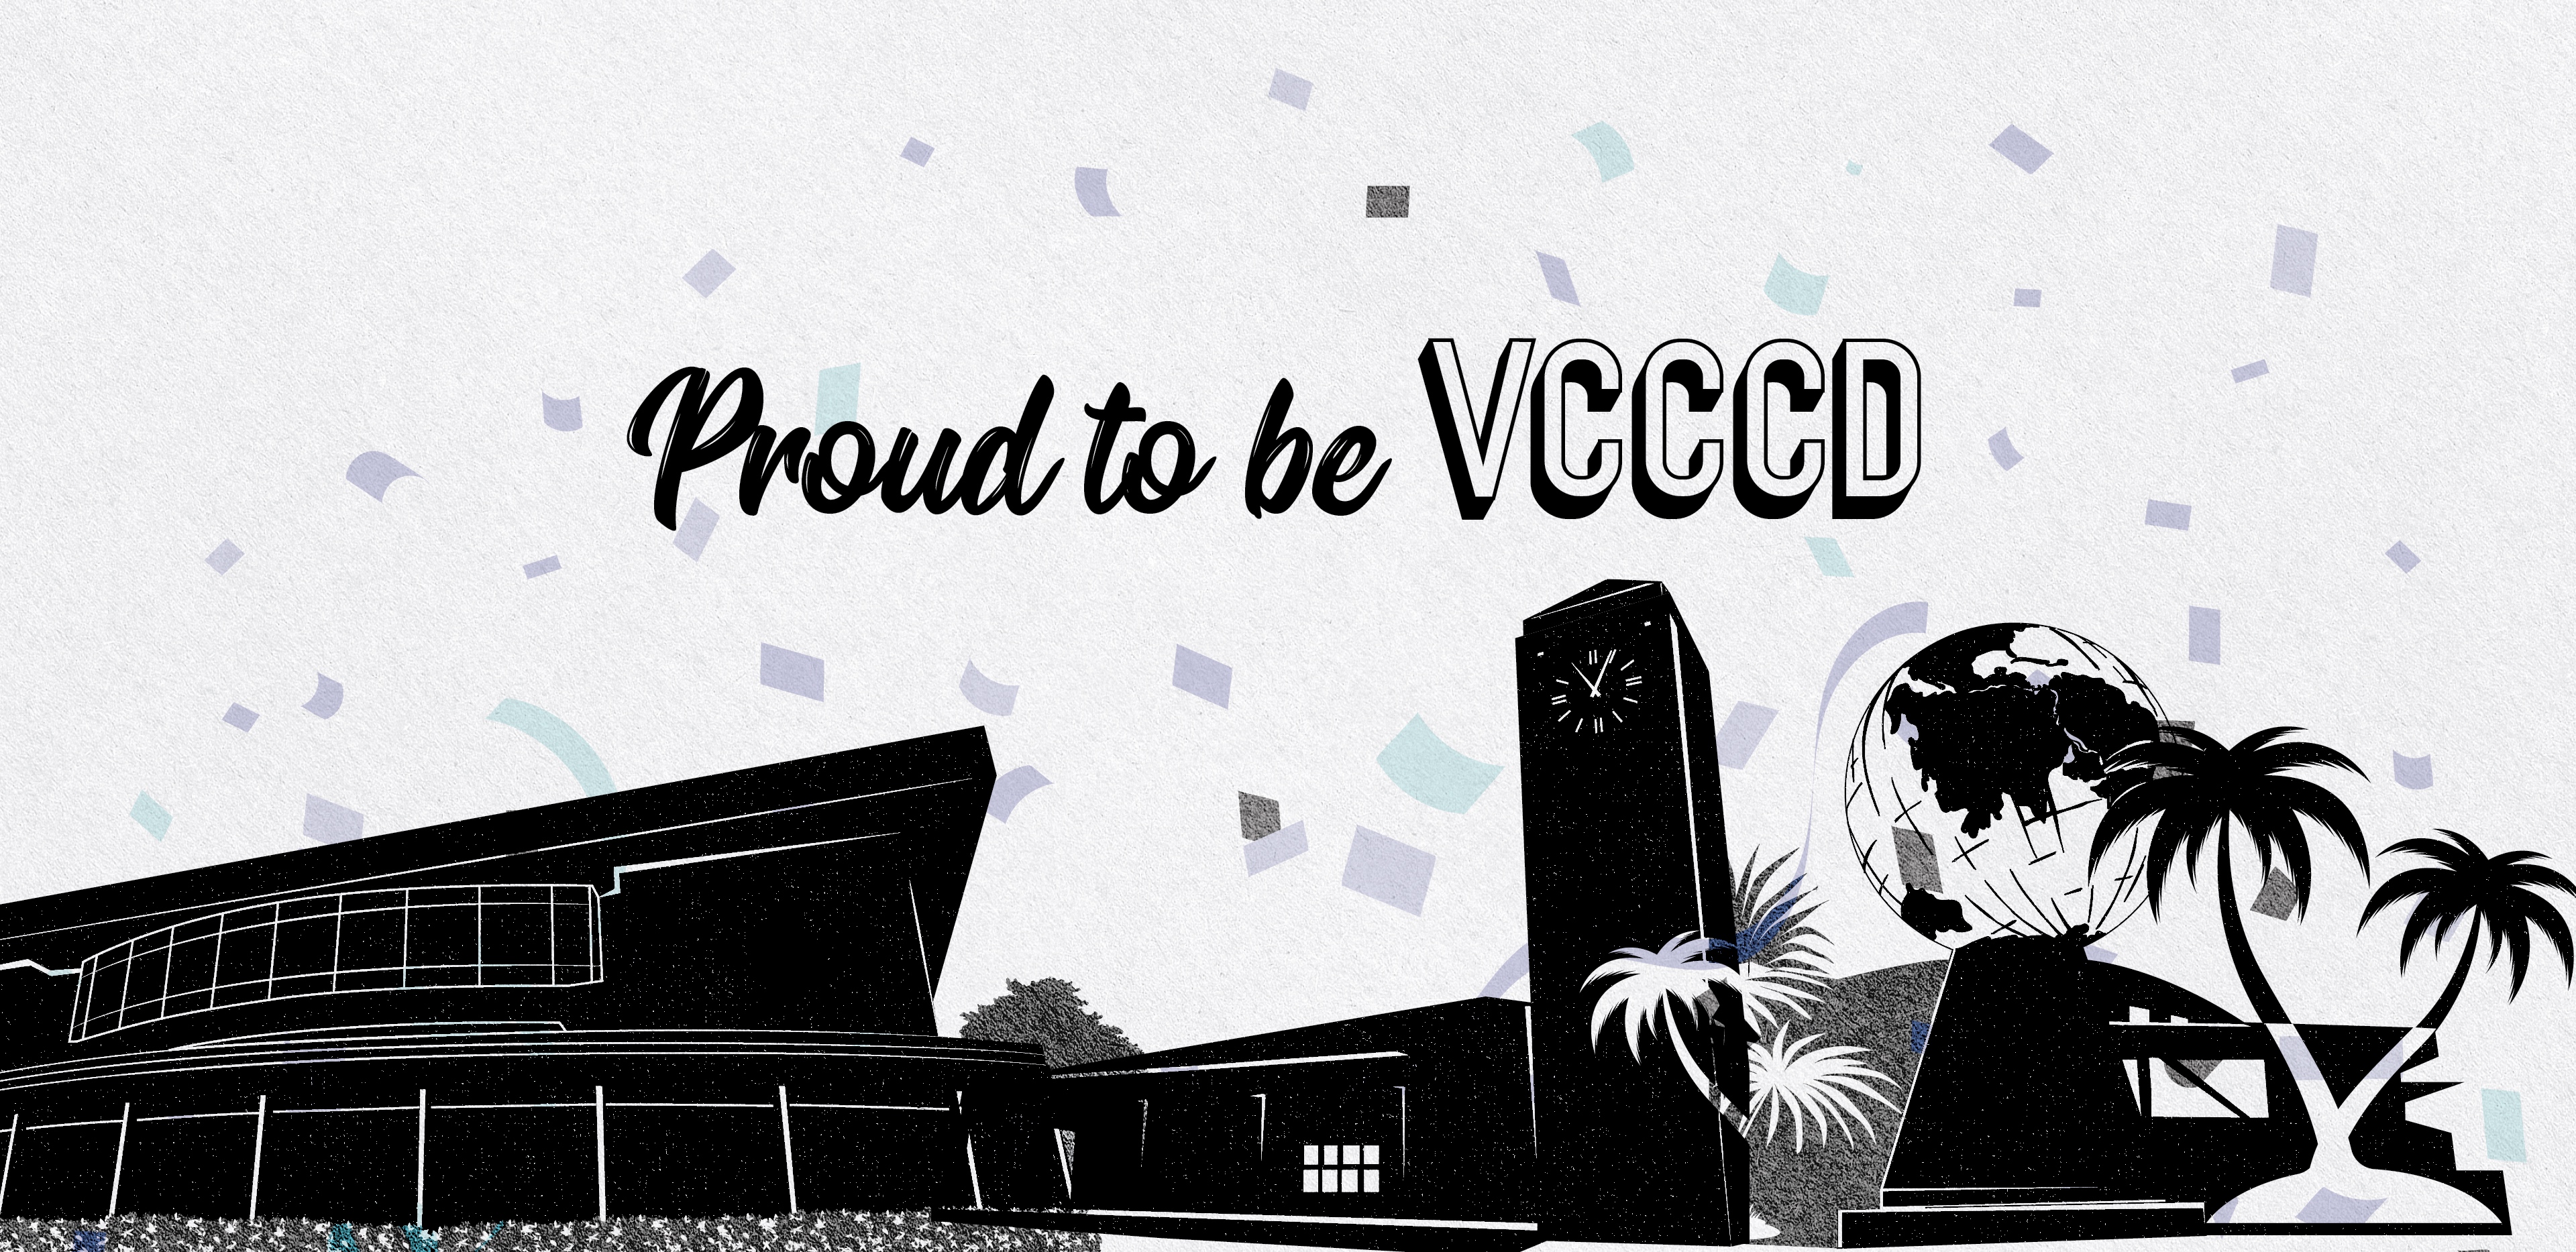 Black silhouettes of buildings from MC, OC, VC with lavender and blue confetti; text "Proud to be VCCCD"